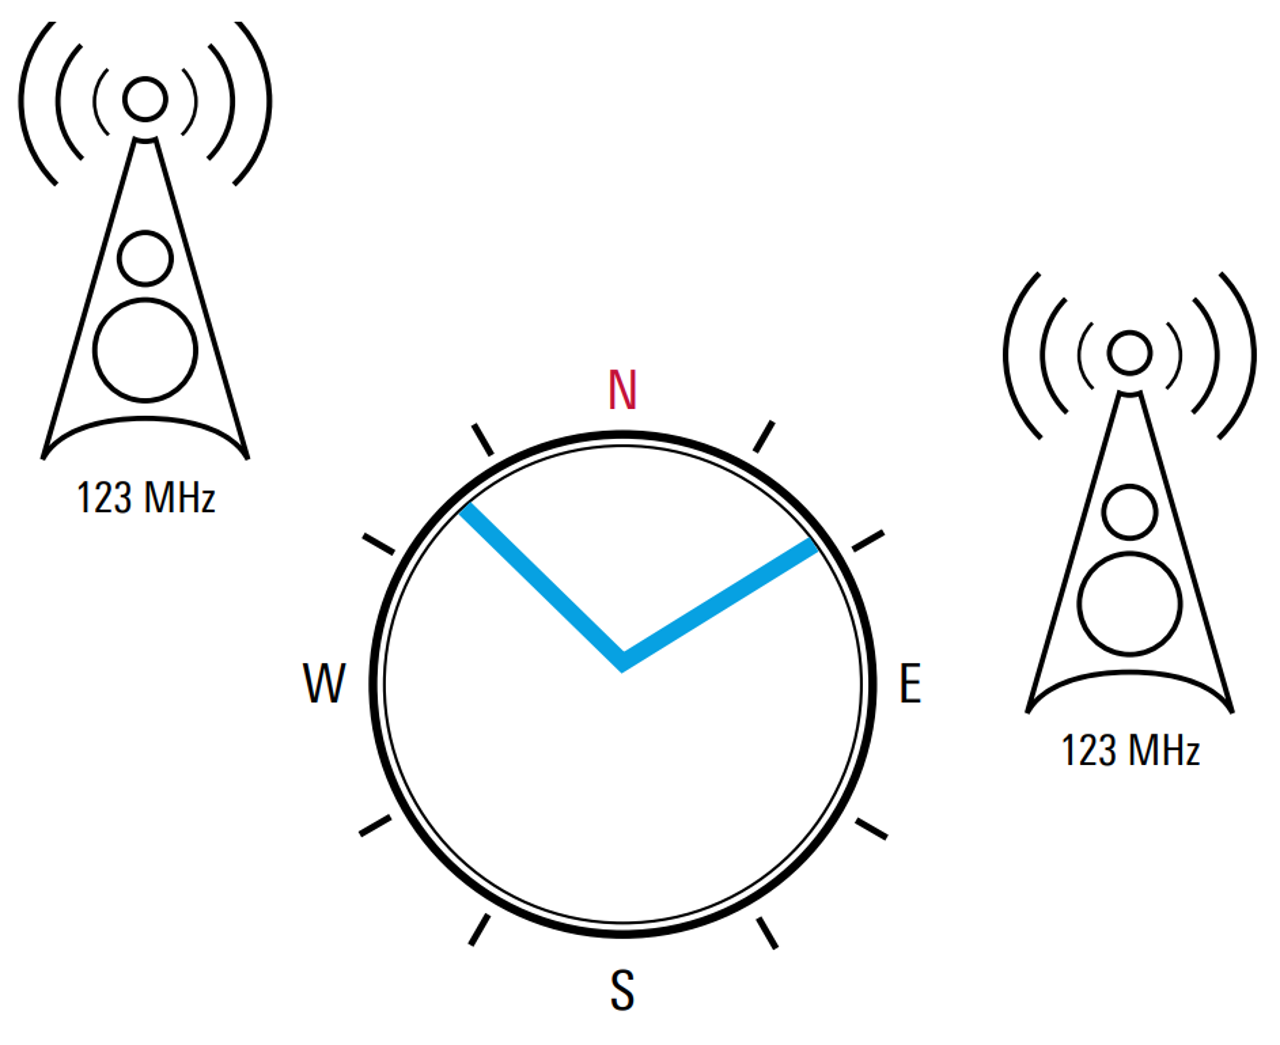 Co-channel interference of two transmitters